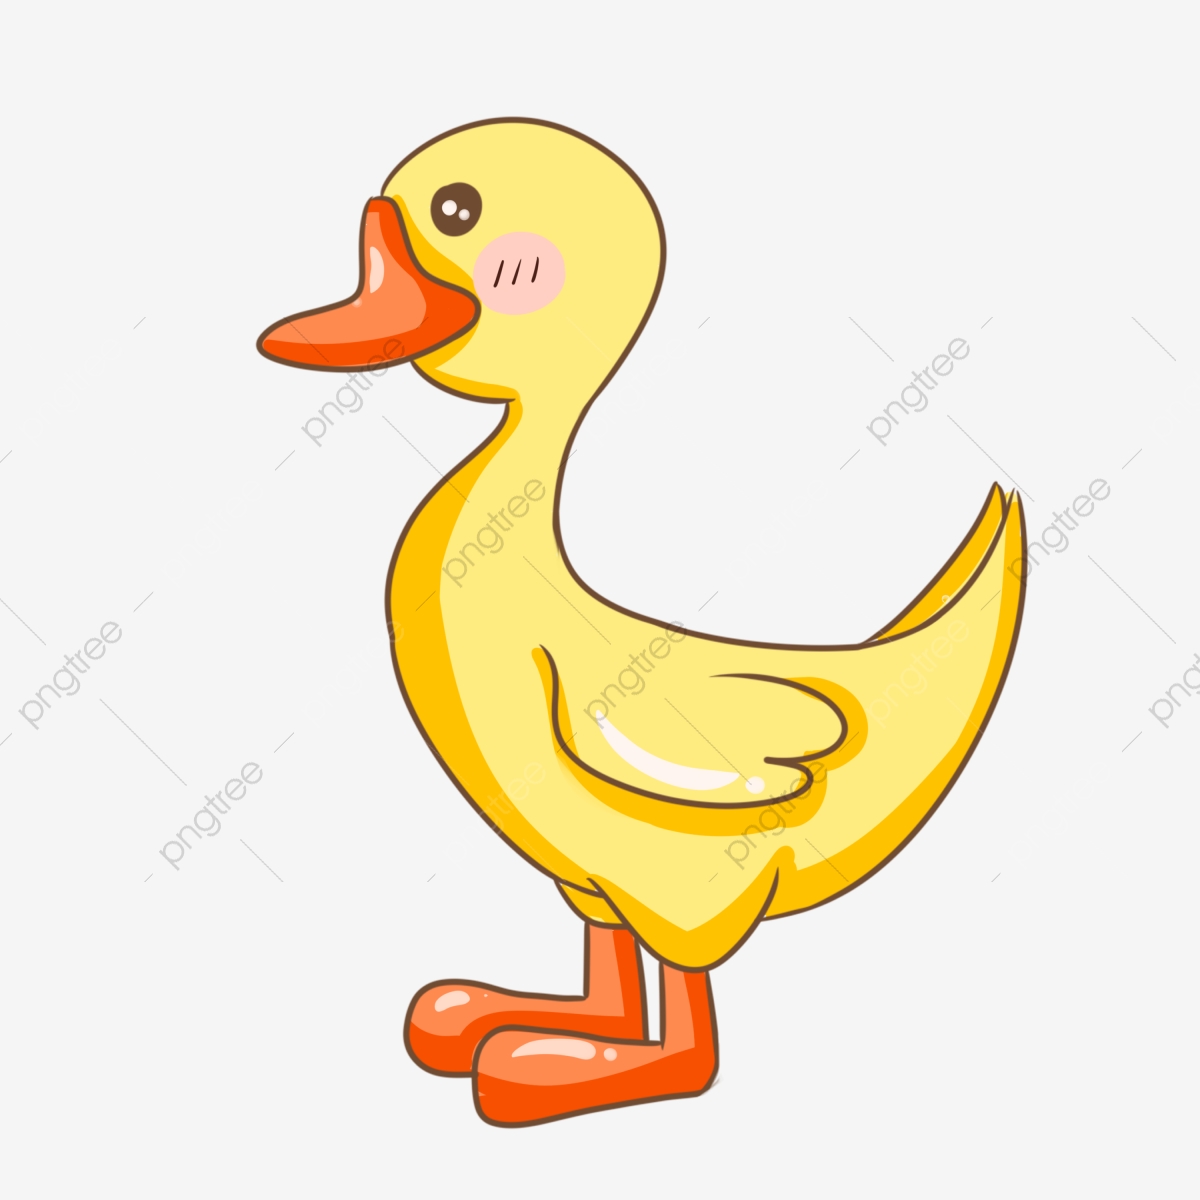 Duckling clipart red duck. Yellow cute little illustration